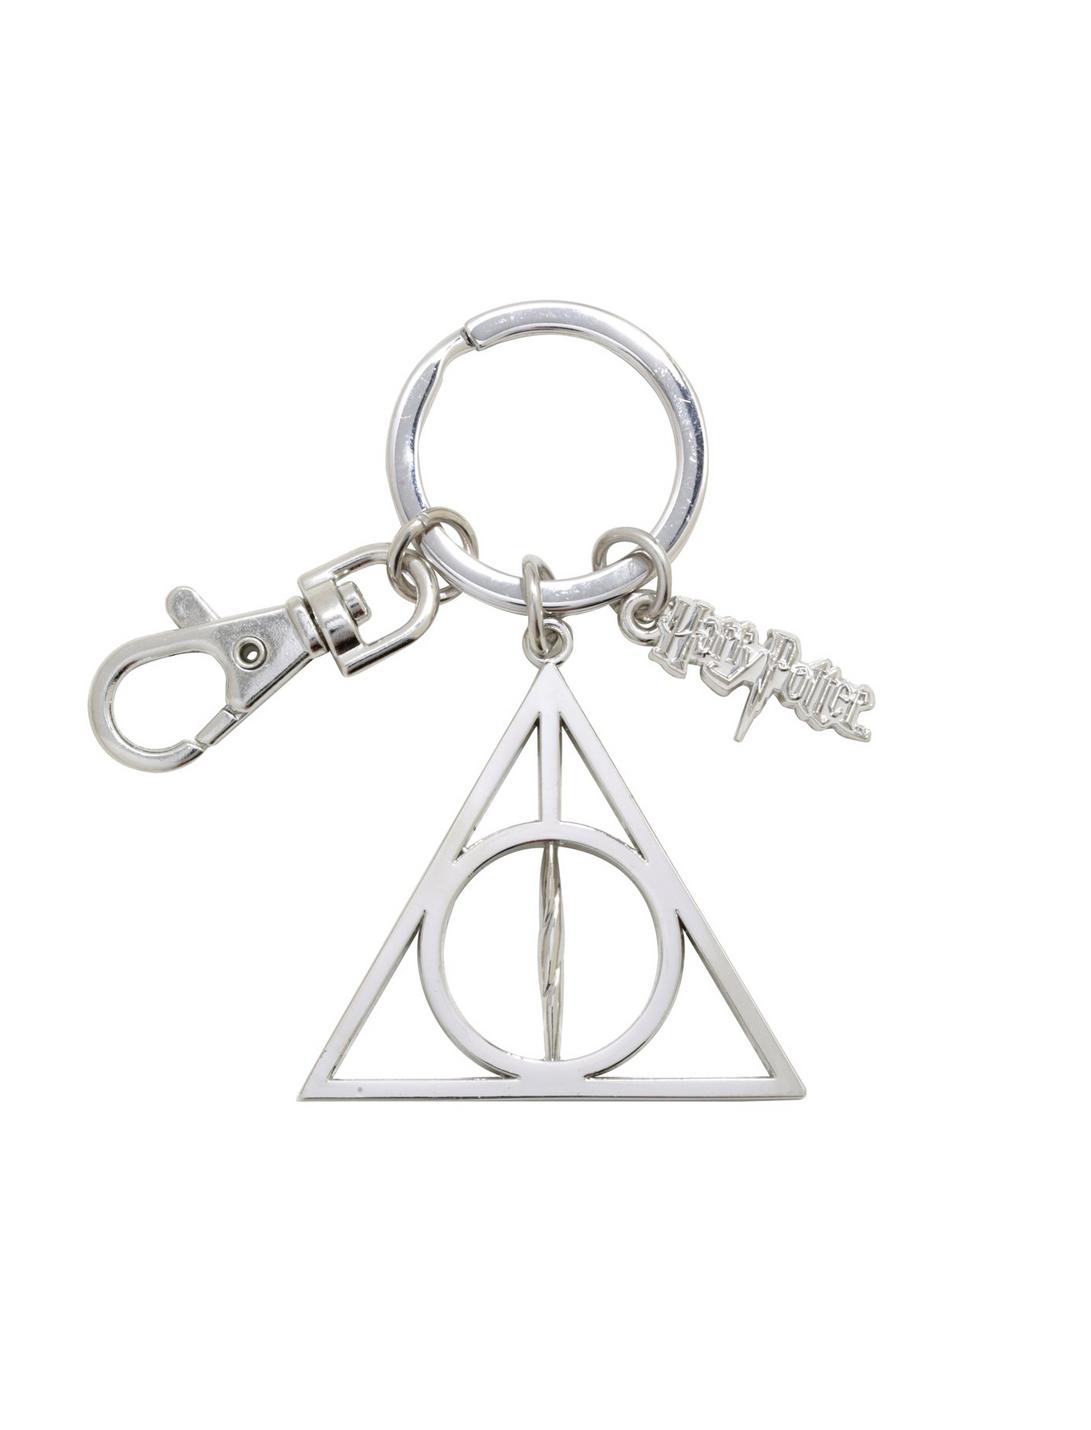 Harry Potter Deathly Hallows Metal Key Chain, , hi-res